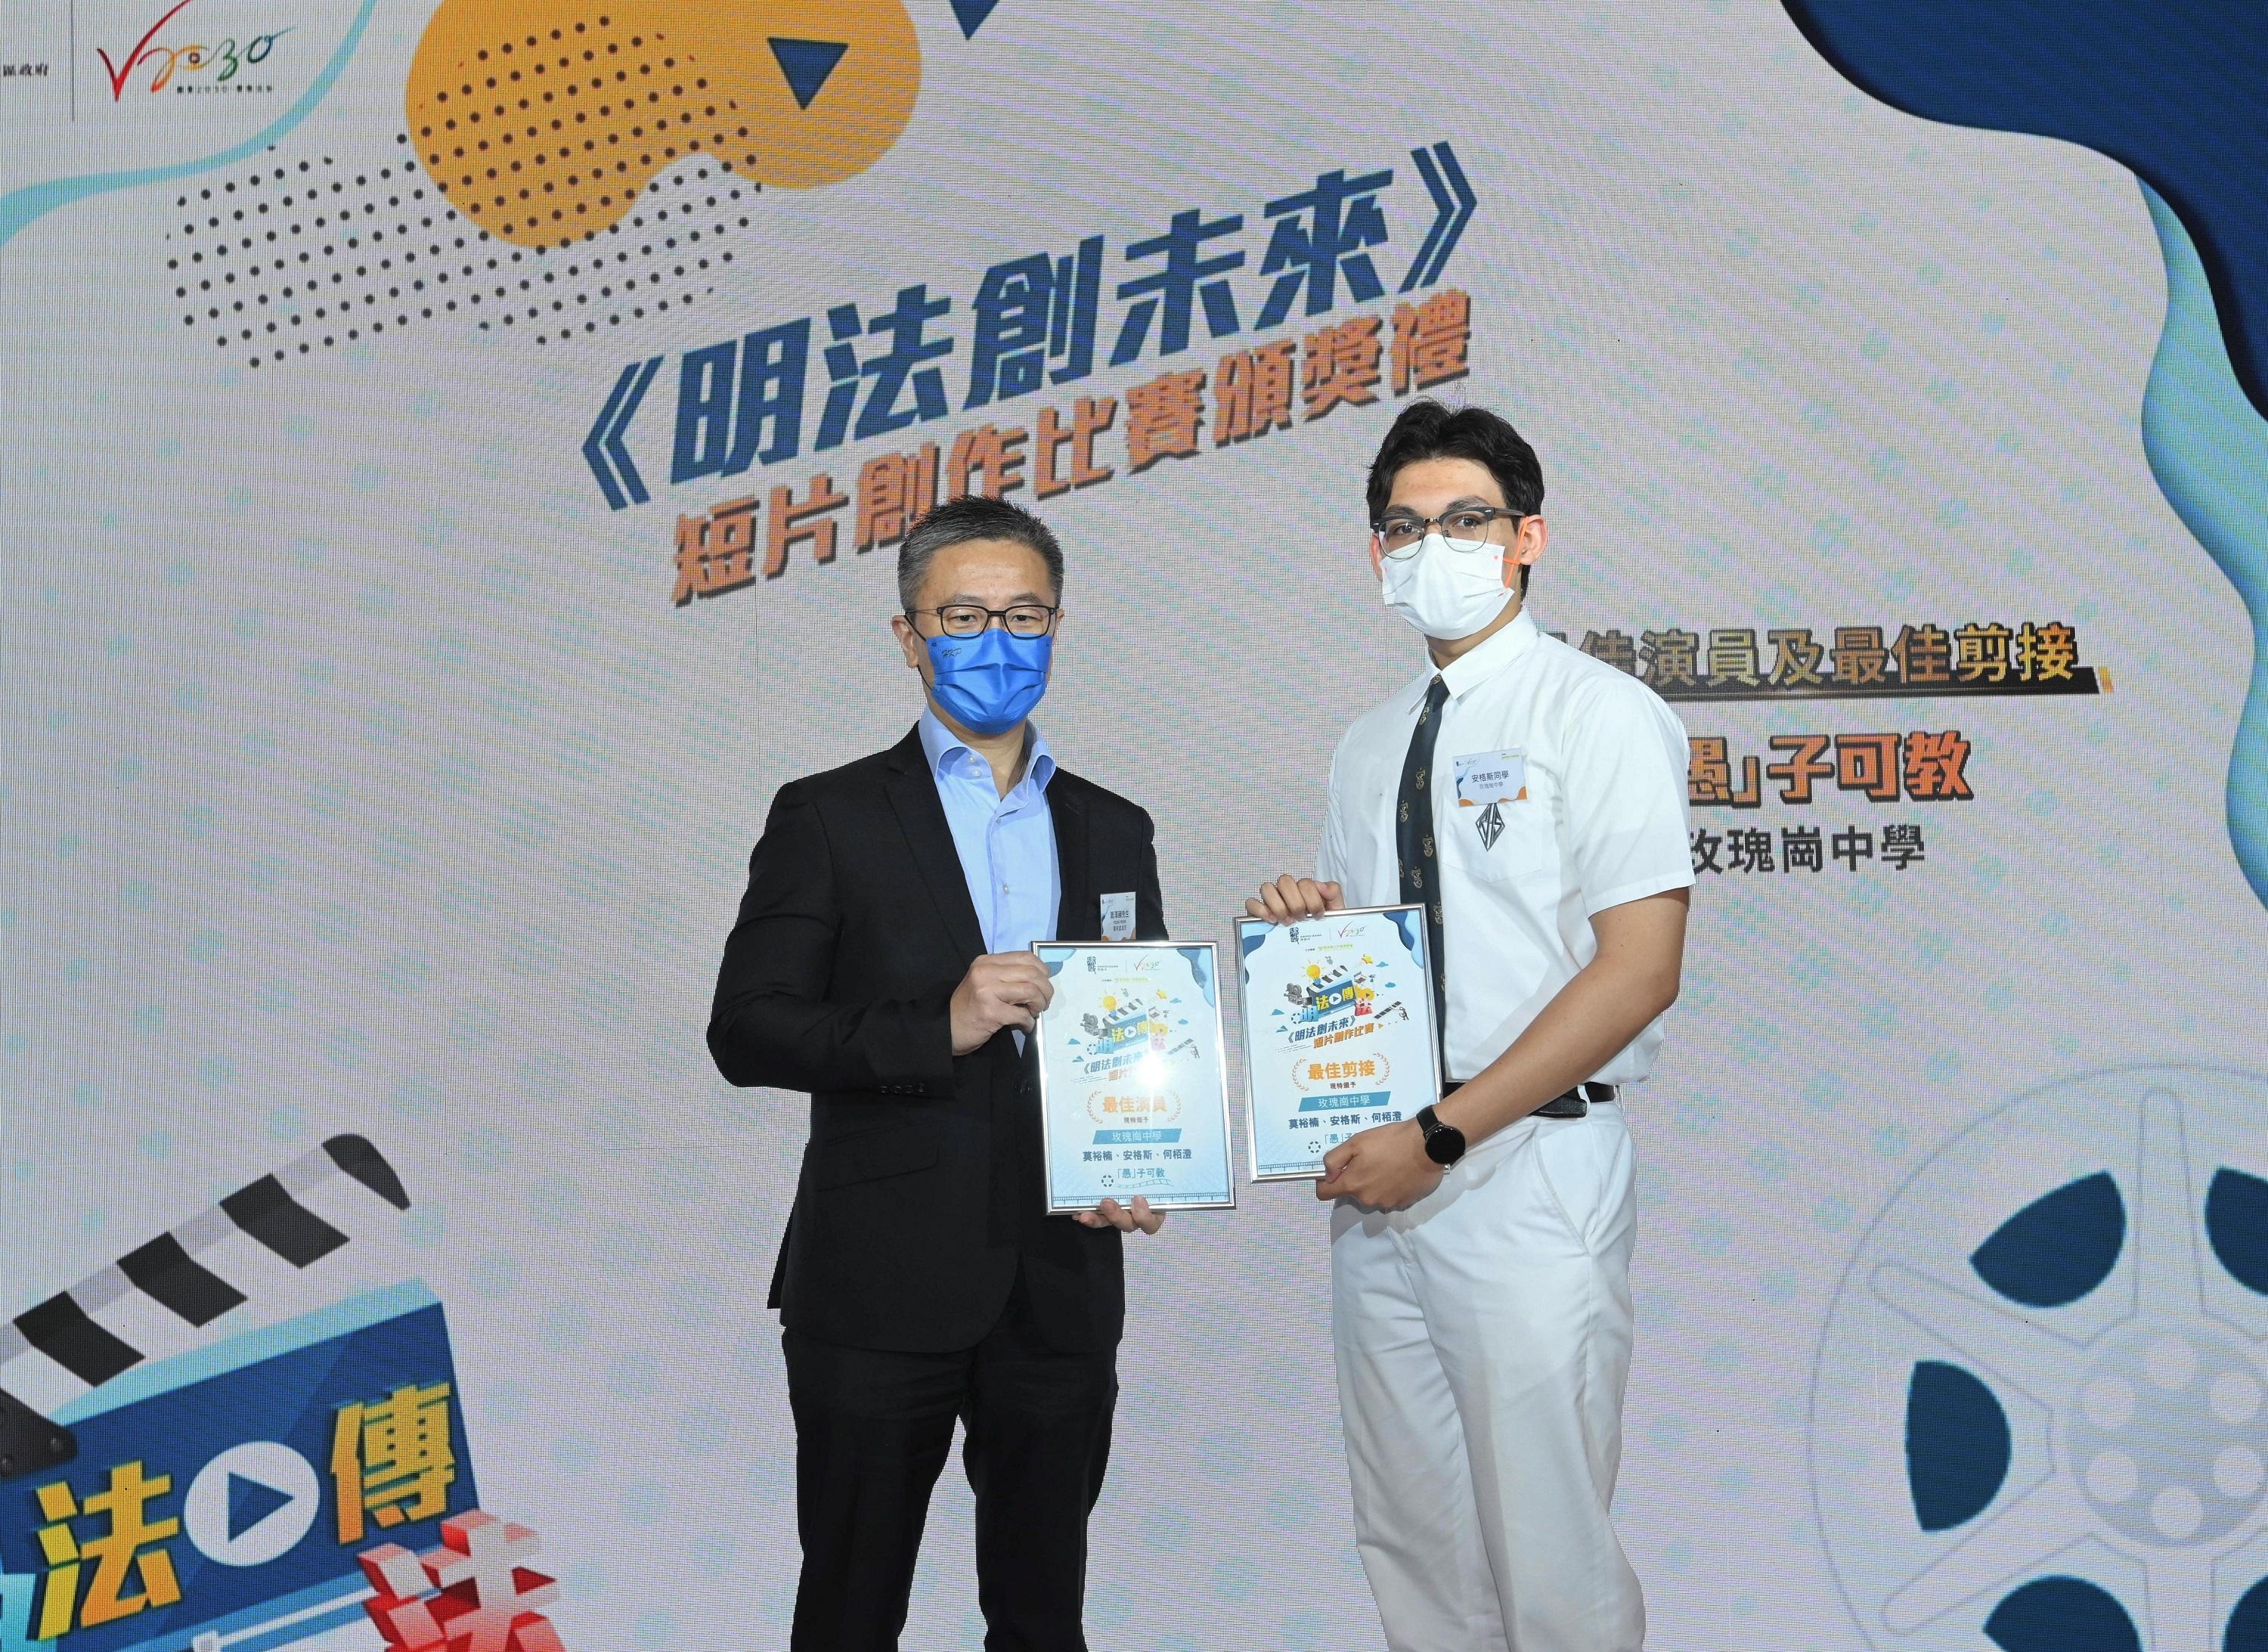 The "Key to the Future" Short Video Competition Award Presentation Ceremony organised by the Department of Justice was held today (May 7). Picture shows the Commissioner of Police, Mr Raymond Siu, presenting award to the best actor.